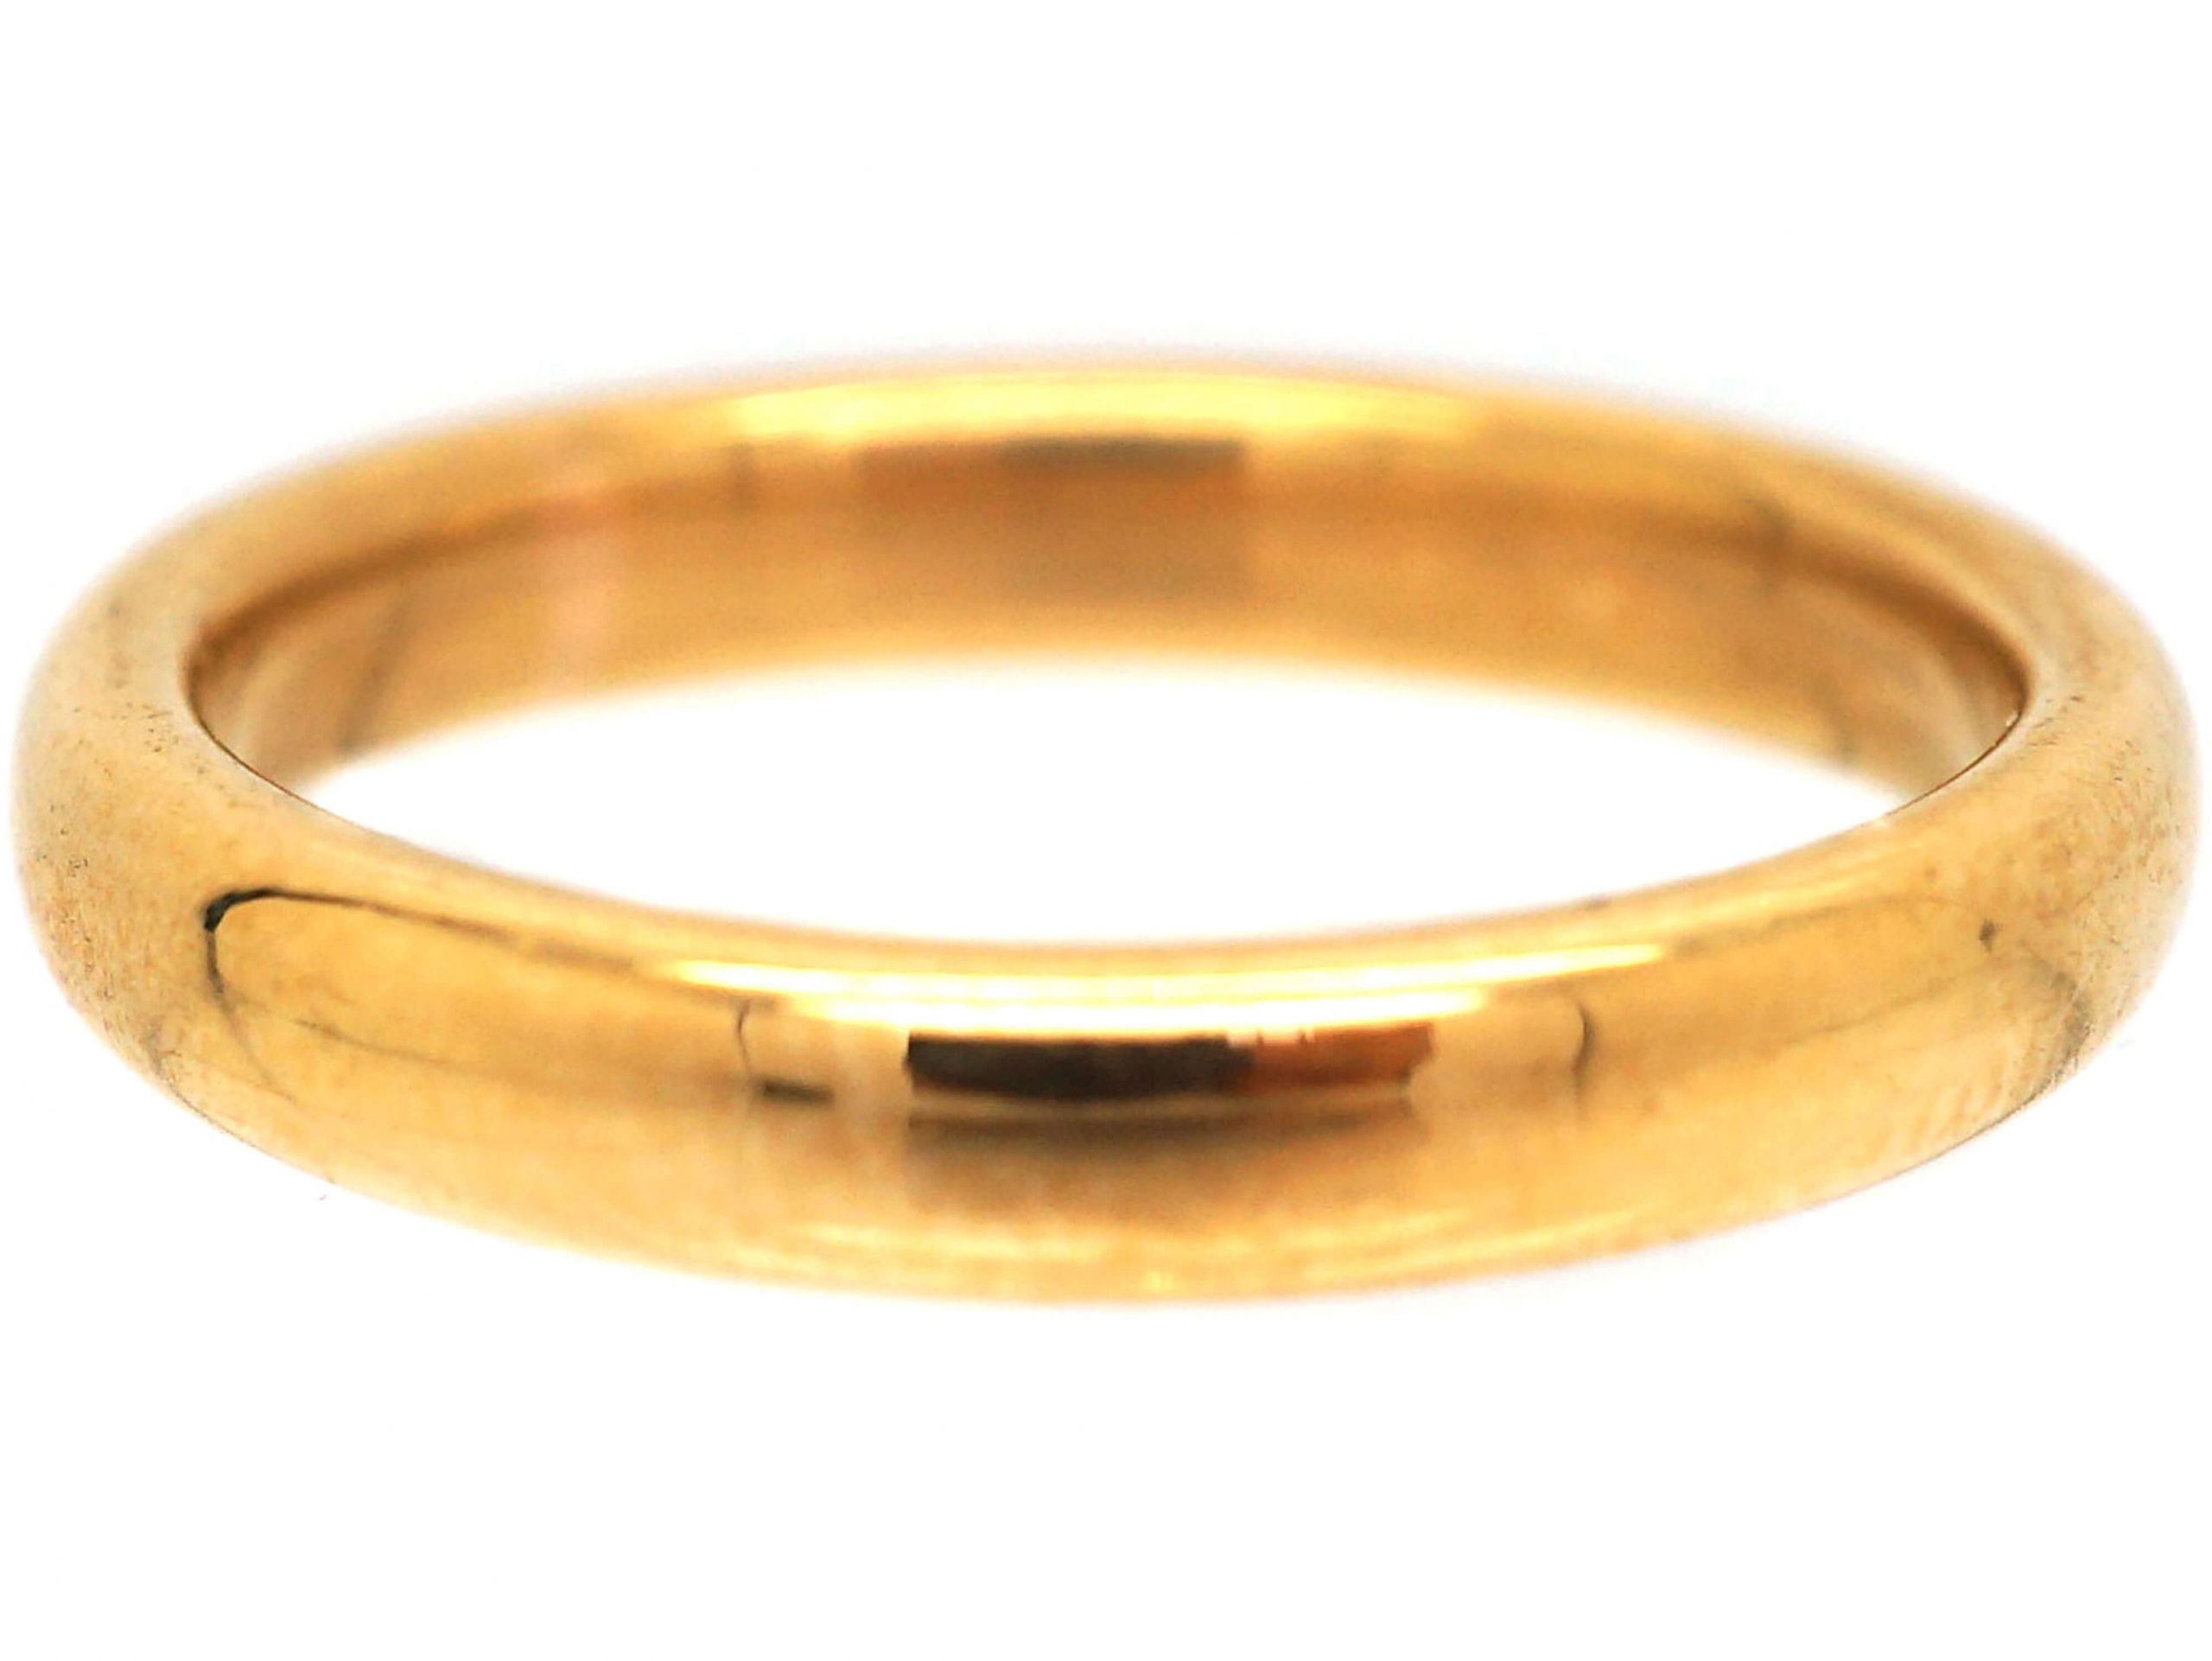 22ct Gold Wedding Ring Assayed in 1931 (604R) | The Antique Jewellery ...